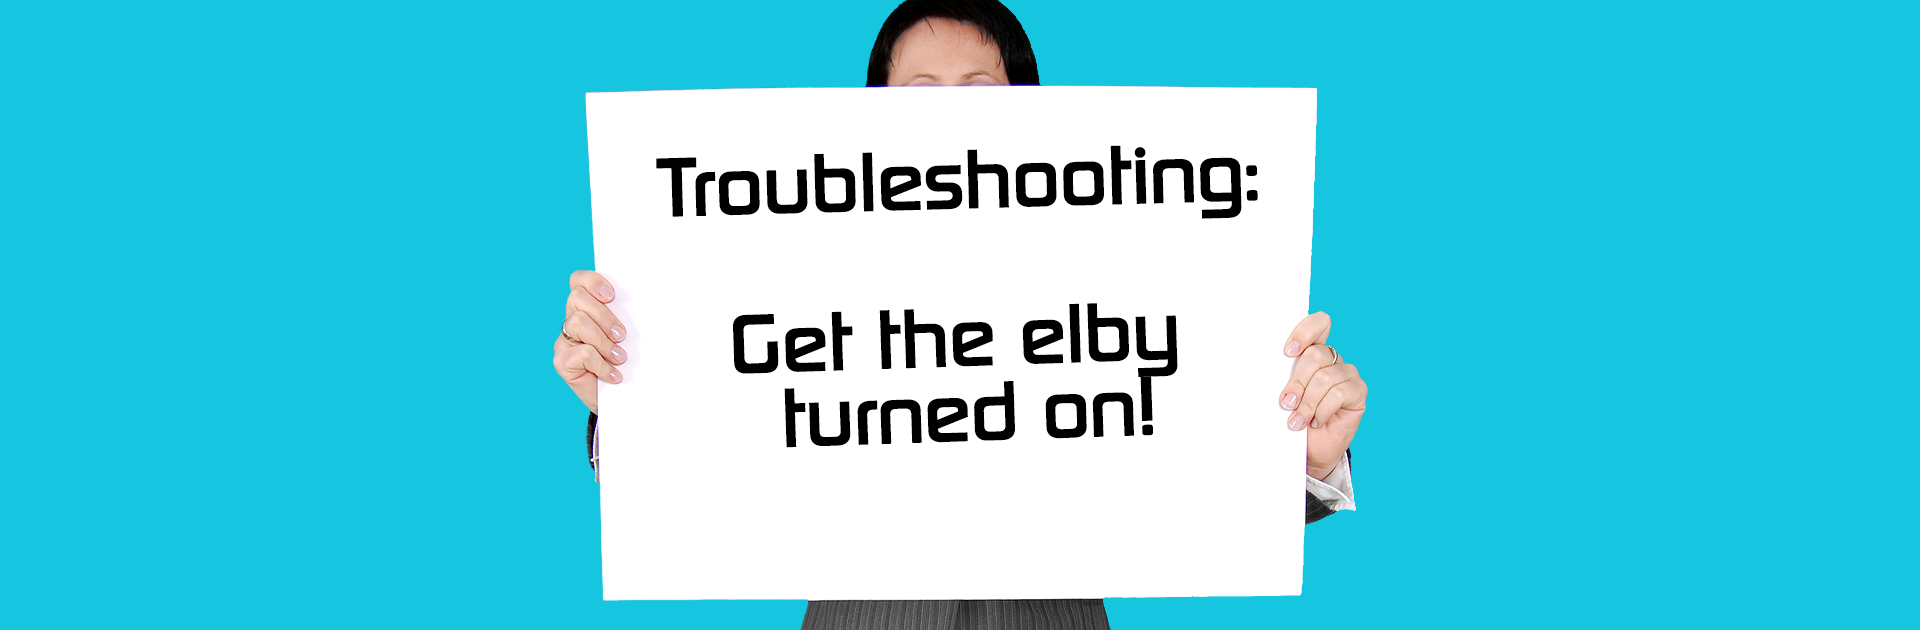 Tech Tip Tuesday - Troubleshooting "Elby won't turn on"